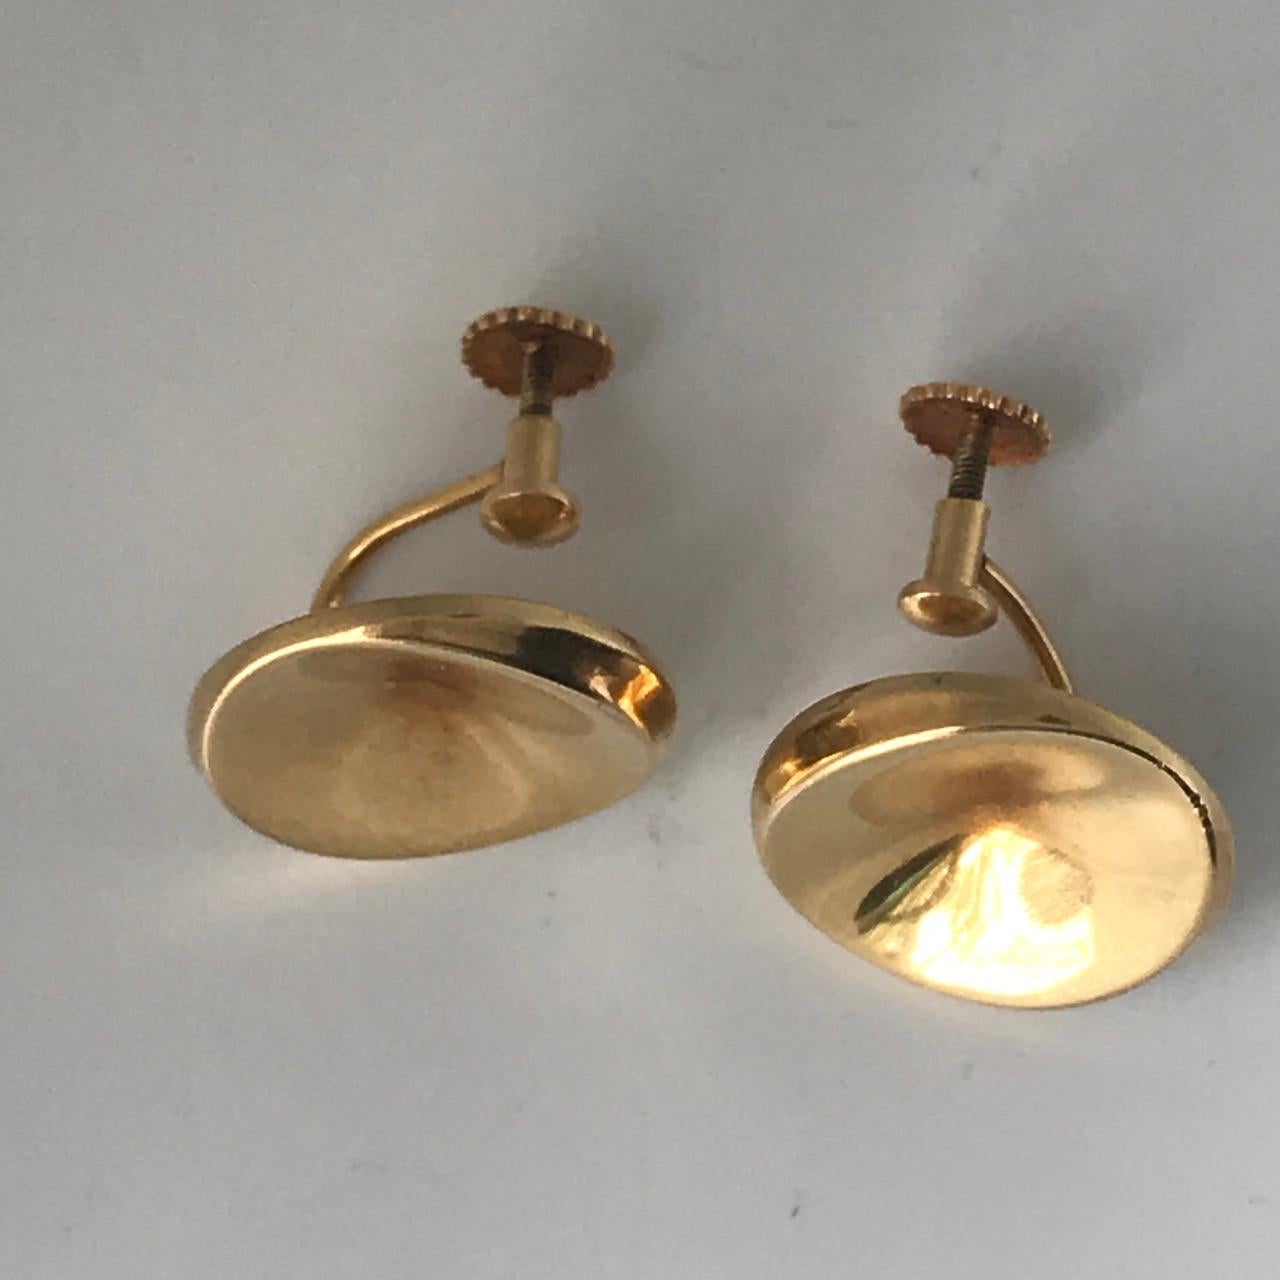 Georg Jensen modernist Earrings No. 1136 18K by Nanna Ditzel.
They catch the light beautifully in the 